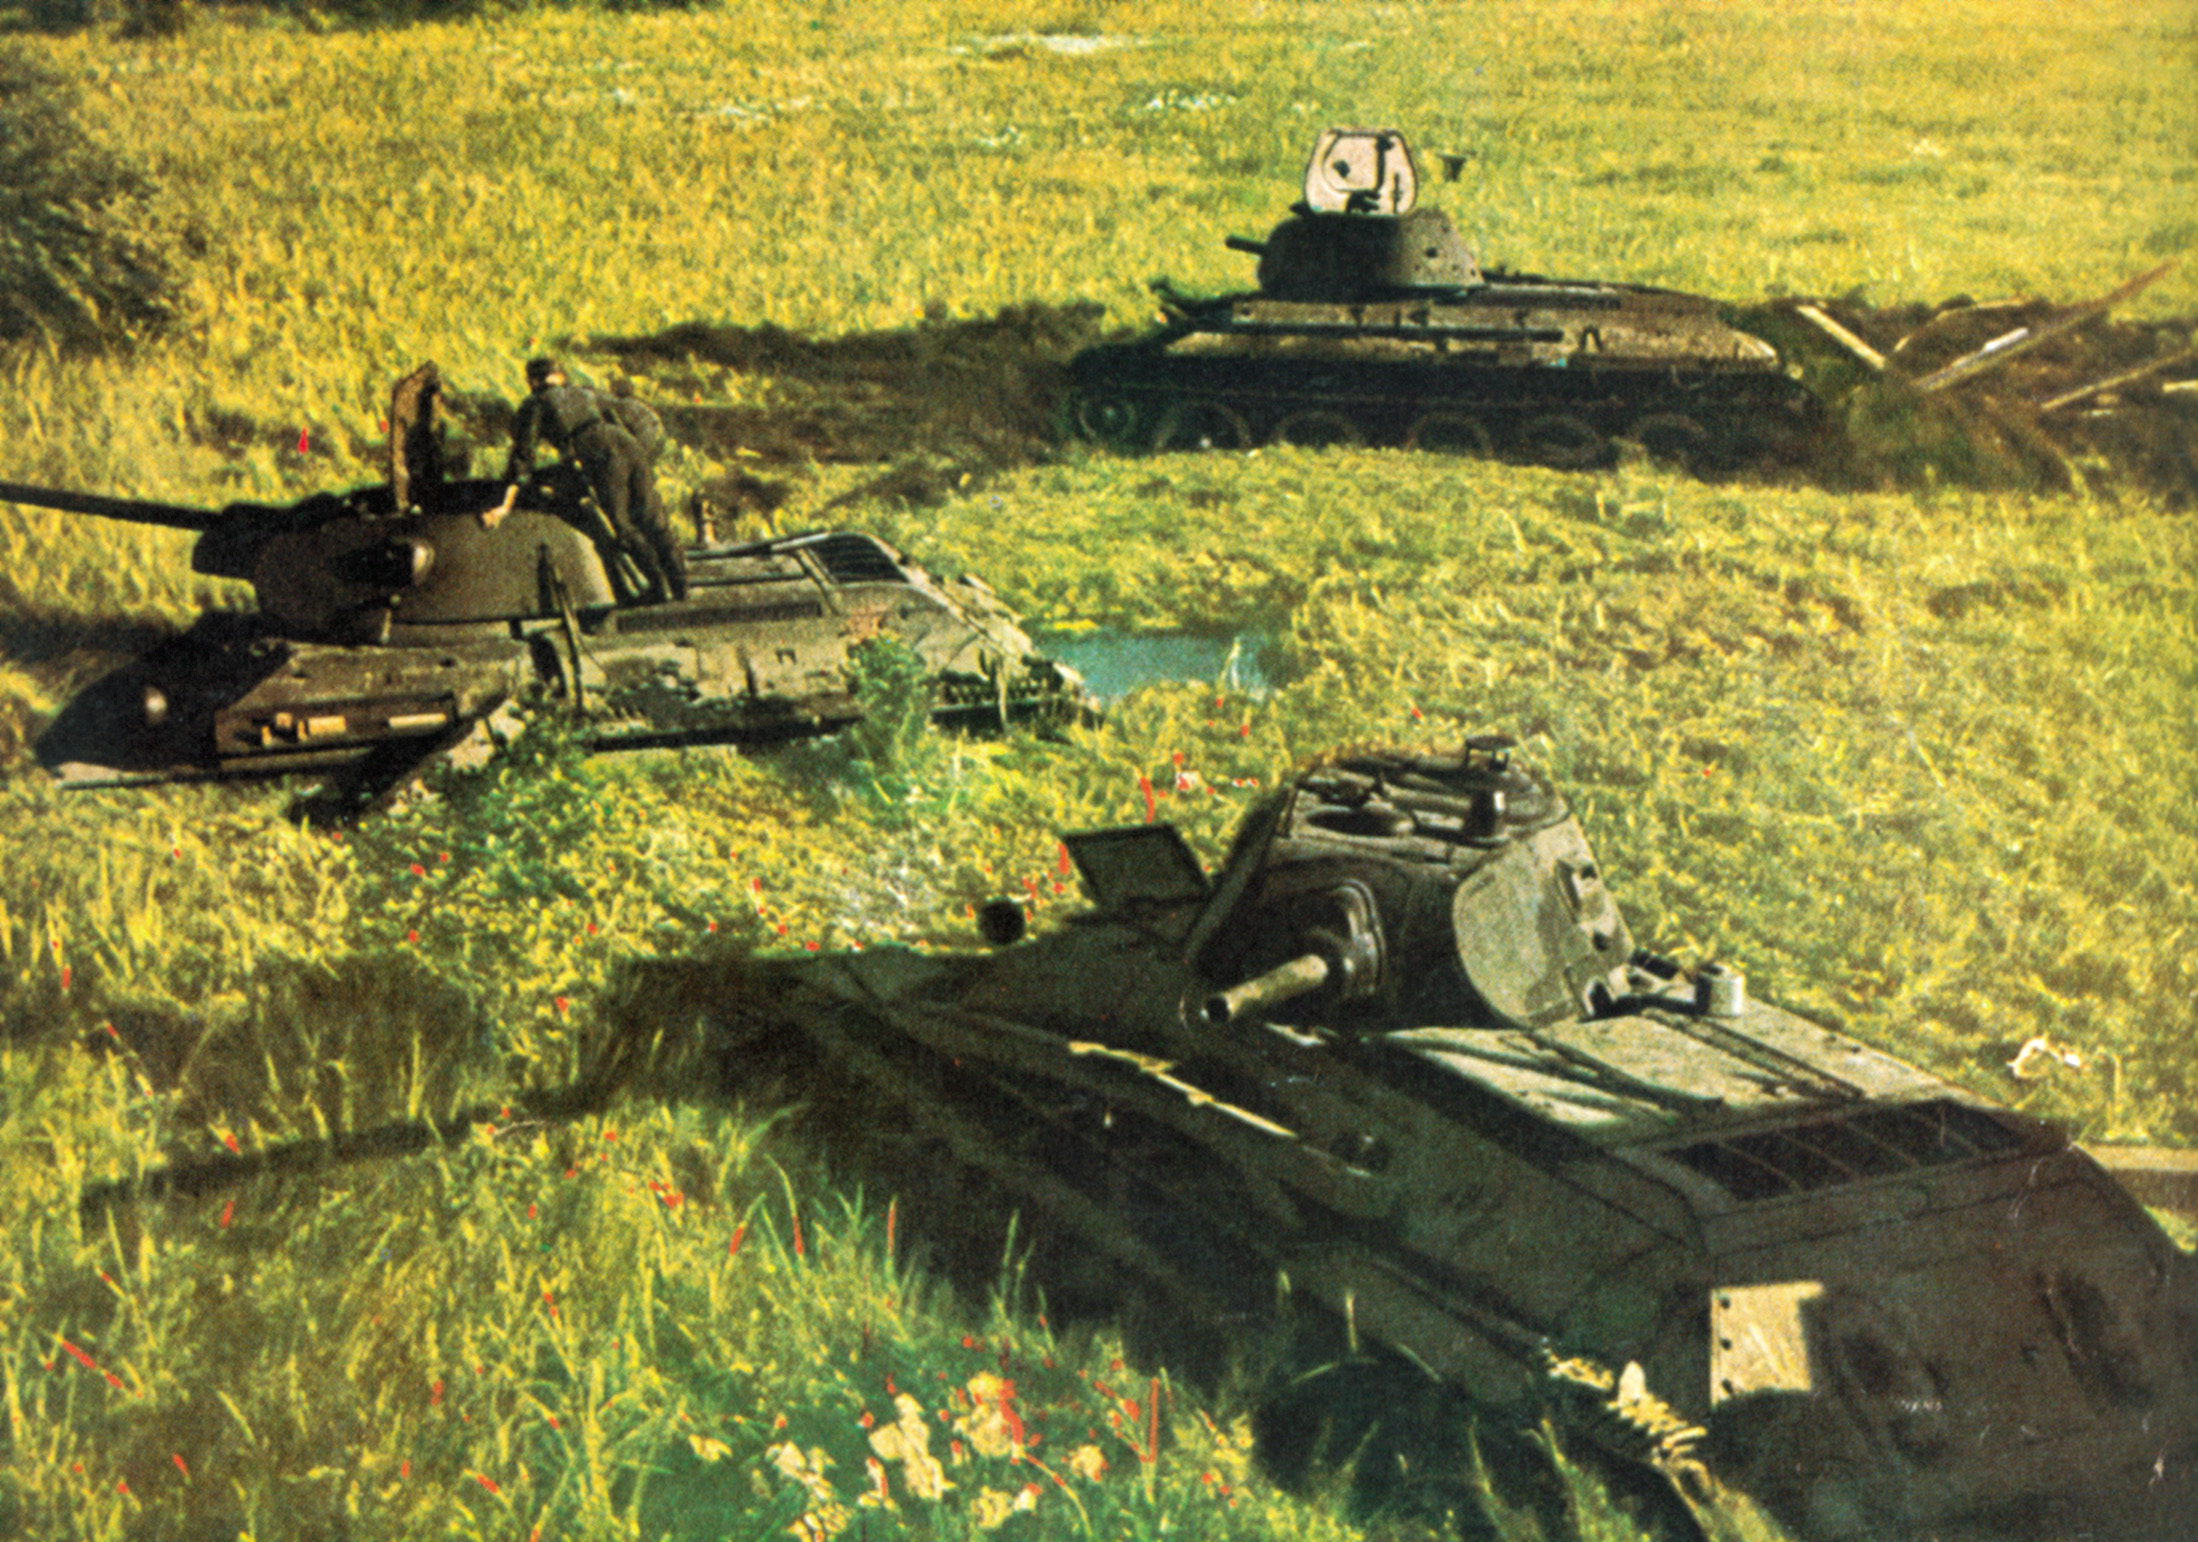 Soviet tanks founder in a marshy quagmire near Tolotshin on the Drut River. The armored force was attempting to break through enemy lines and envelop a large German force.